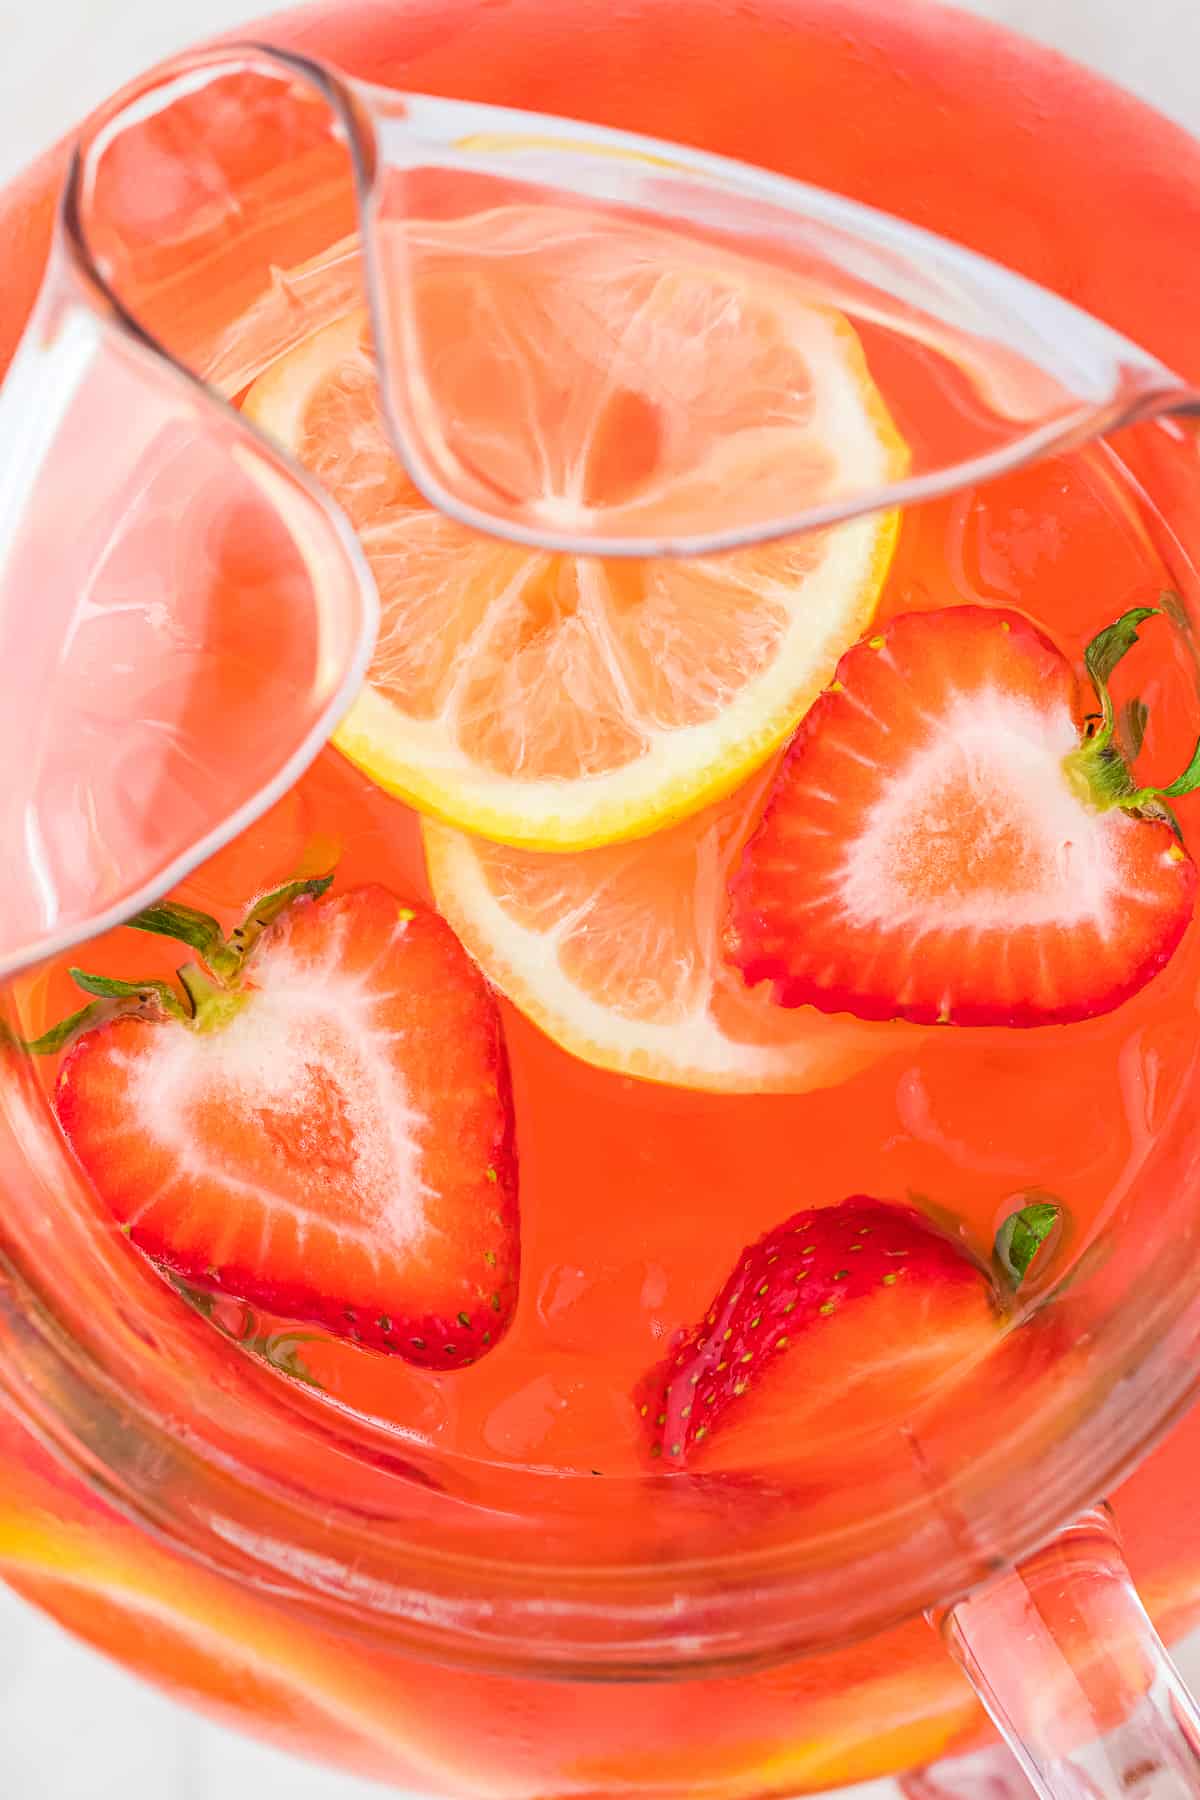 Overhead view of strawberries and lemons floating in a pitcher full of strawberry lemonade vodka.